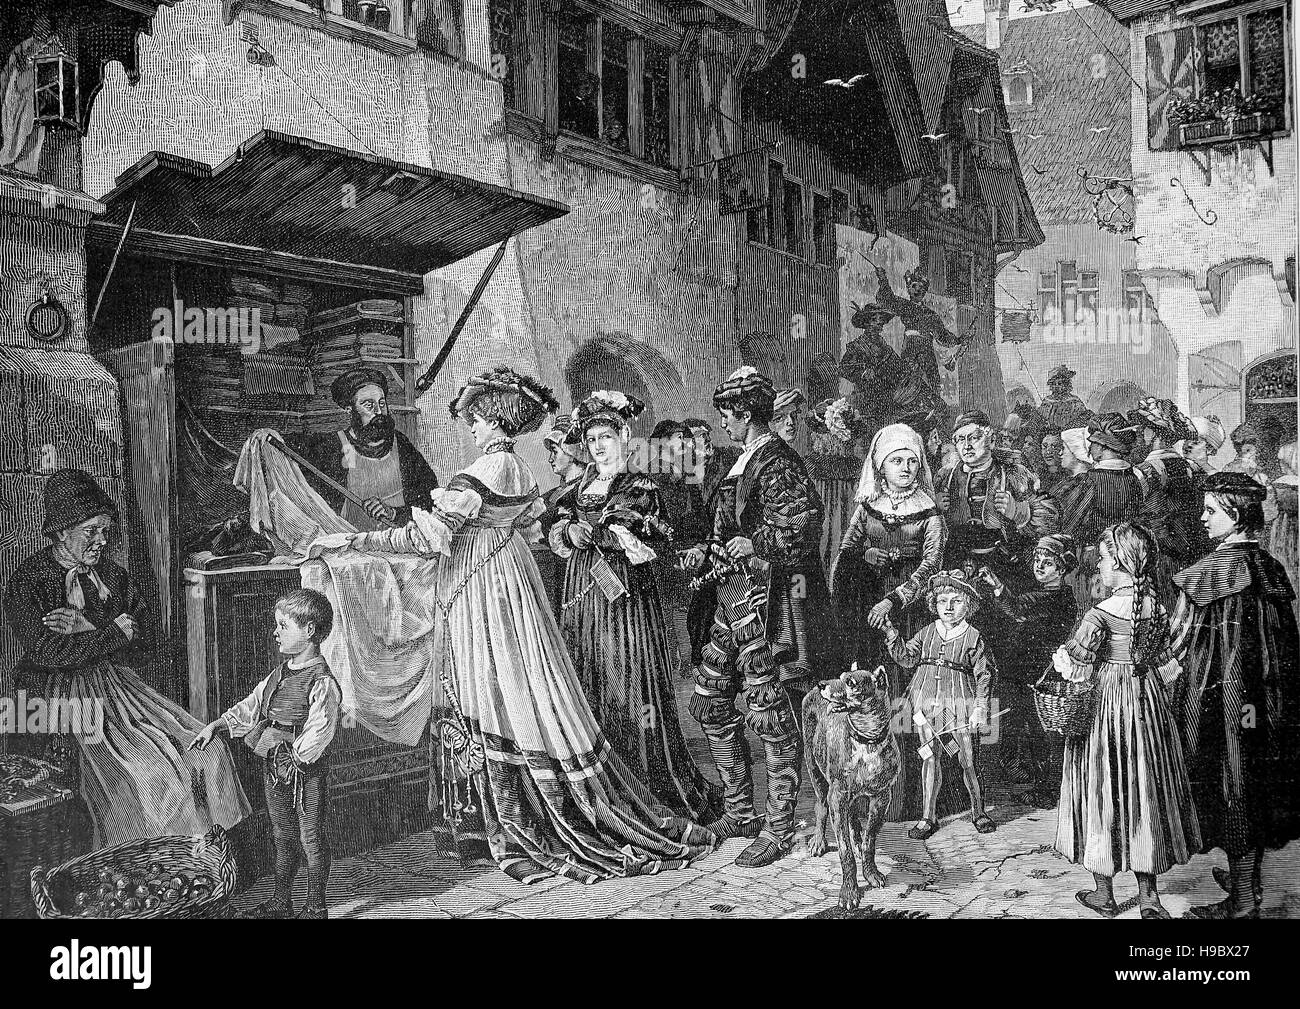 Typical market scene in the Middle Ages in Germany, historical illustration Stock Photo